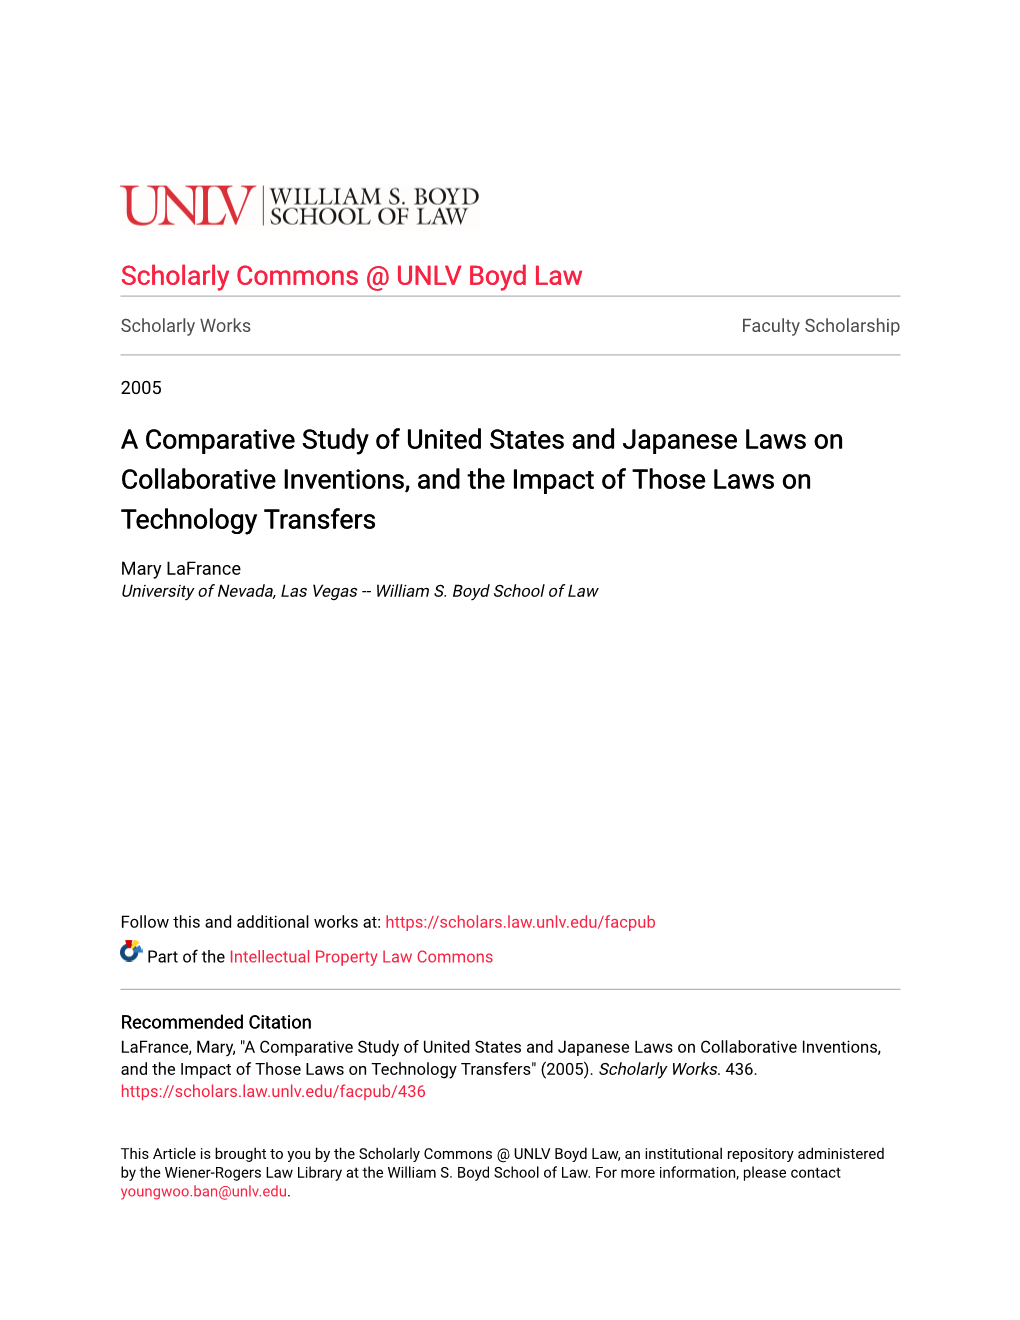 A Comparative Study of United States and Japanese Laws on Collaborative Inventions, and the Impact of Those Laws on Technology Transfers